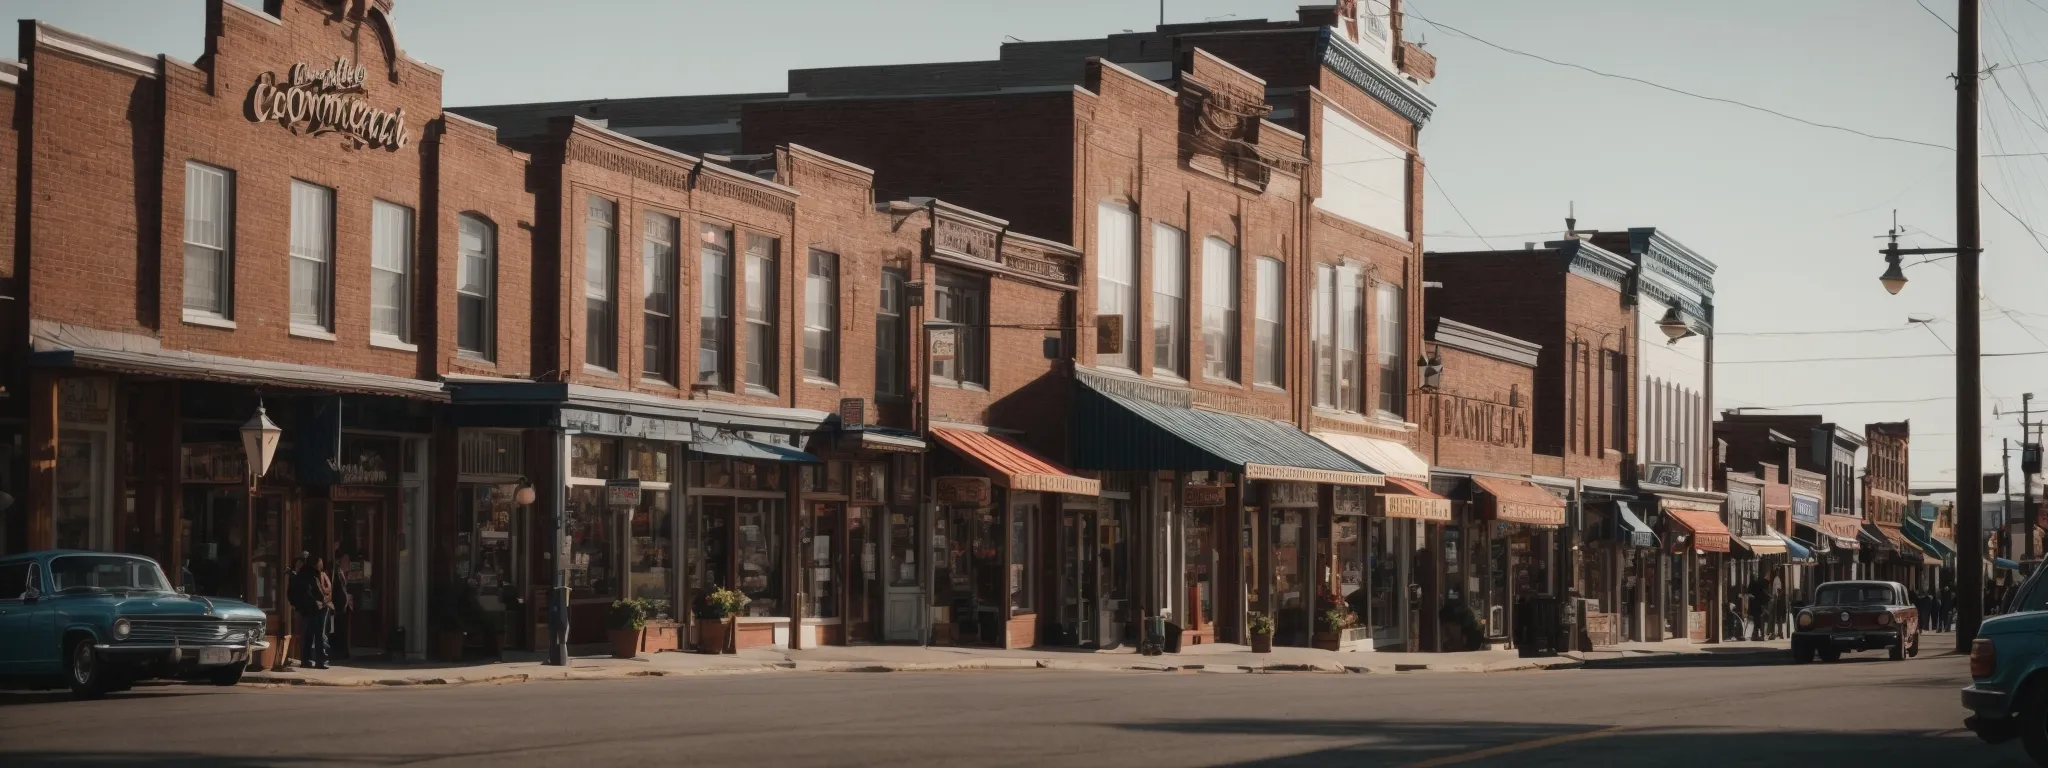 a bustling small-town main street with various storefronts, signaling a thriving local business community in need of an seo strategy.